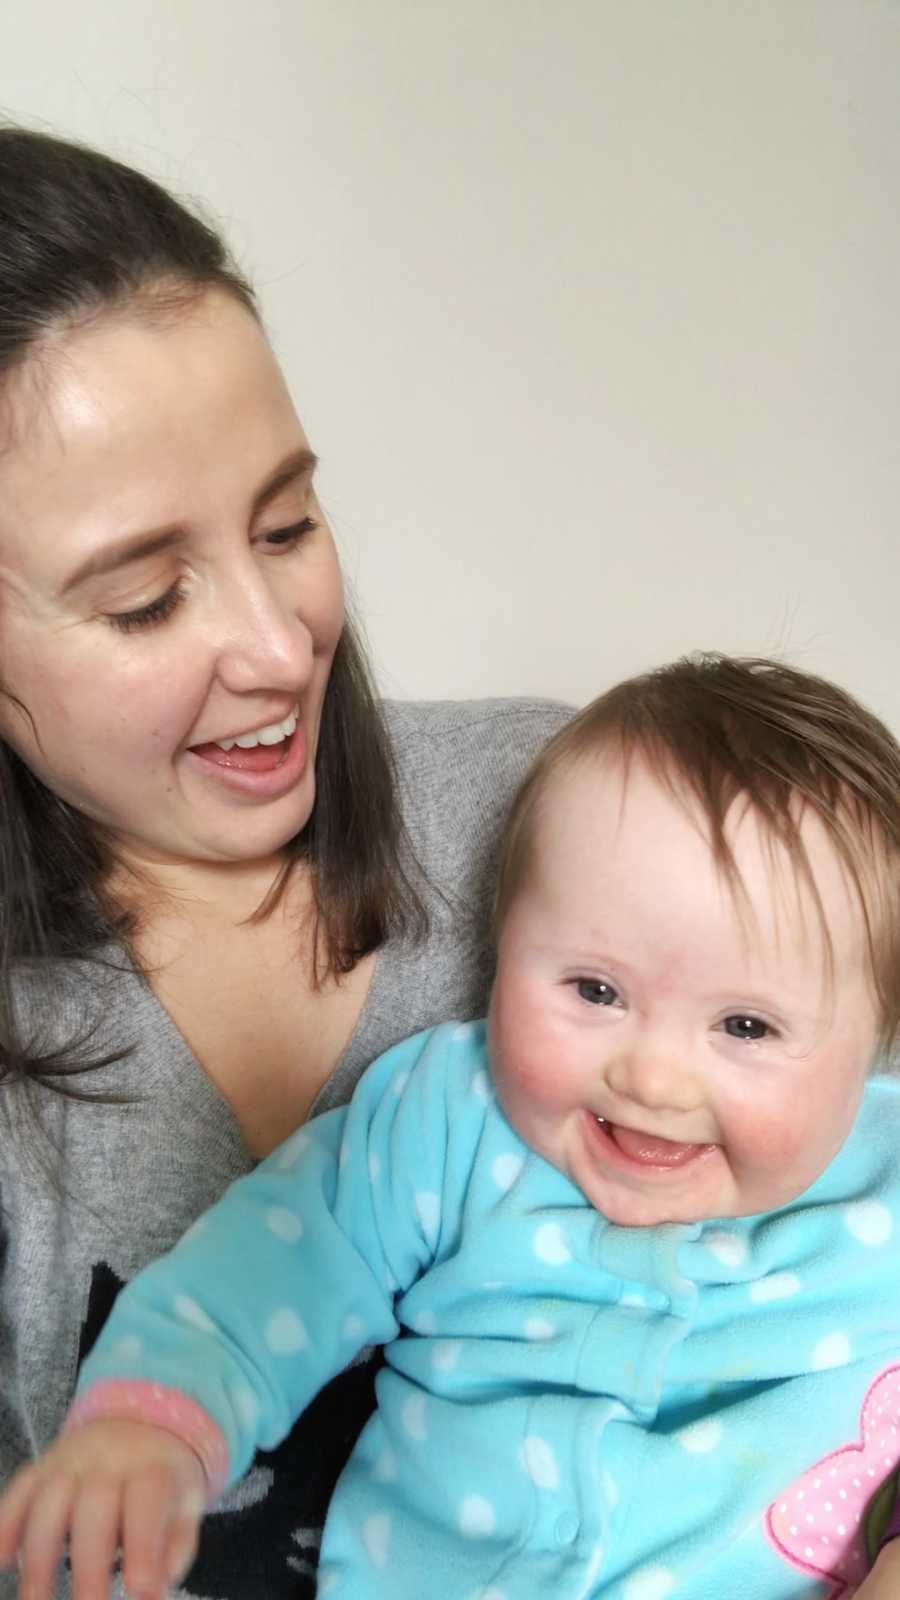 Woman who struggled to get pregnant smiles at one of her twins who has down syndrome